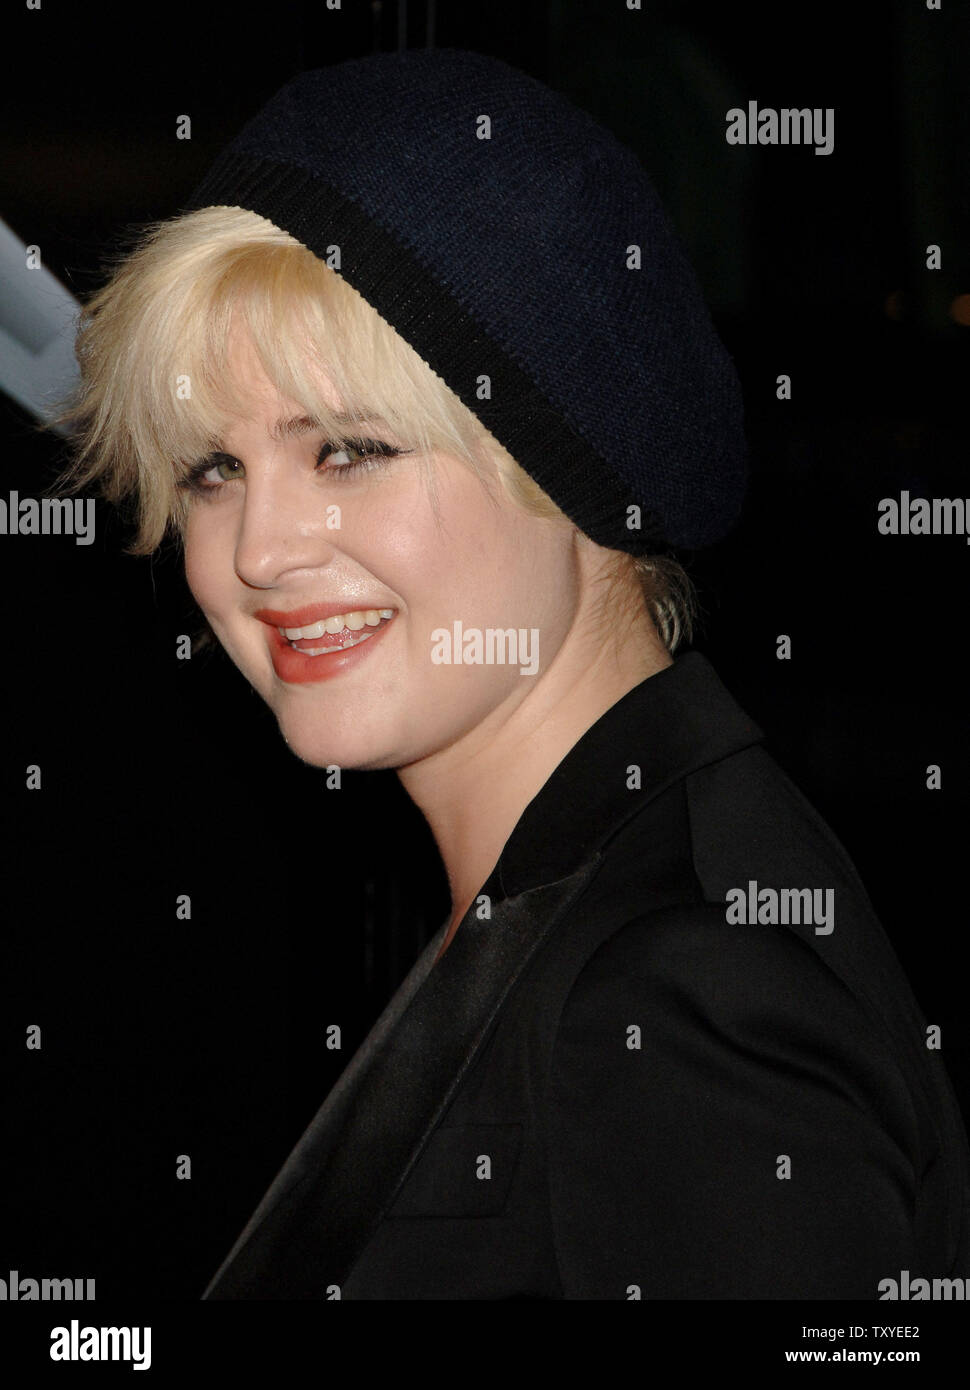 Singer and actress Kelly Osborne arrives as a guest for the premiere of 'Snakes on a Plane' at  Grauman's Chinese Theatre in the Hollywood section of Los Angeles, California on August 17, 2006. The movie opens in the U.S. on August 18. (UPI Photo/Jim Ruymen) Stock Photo